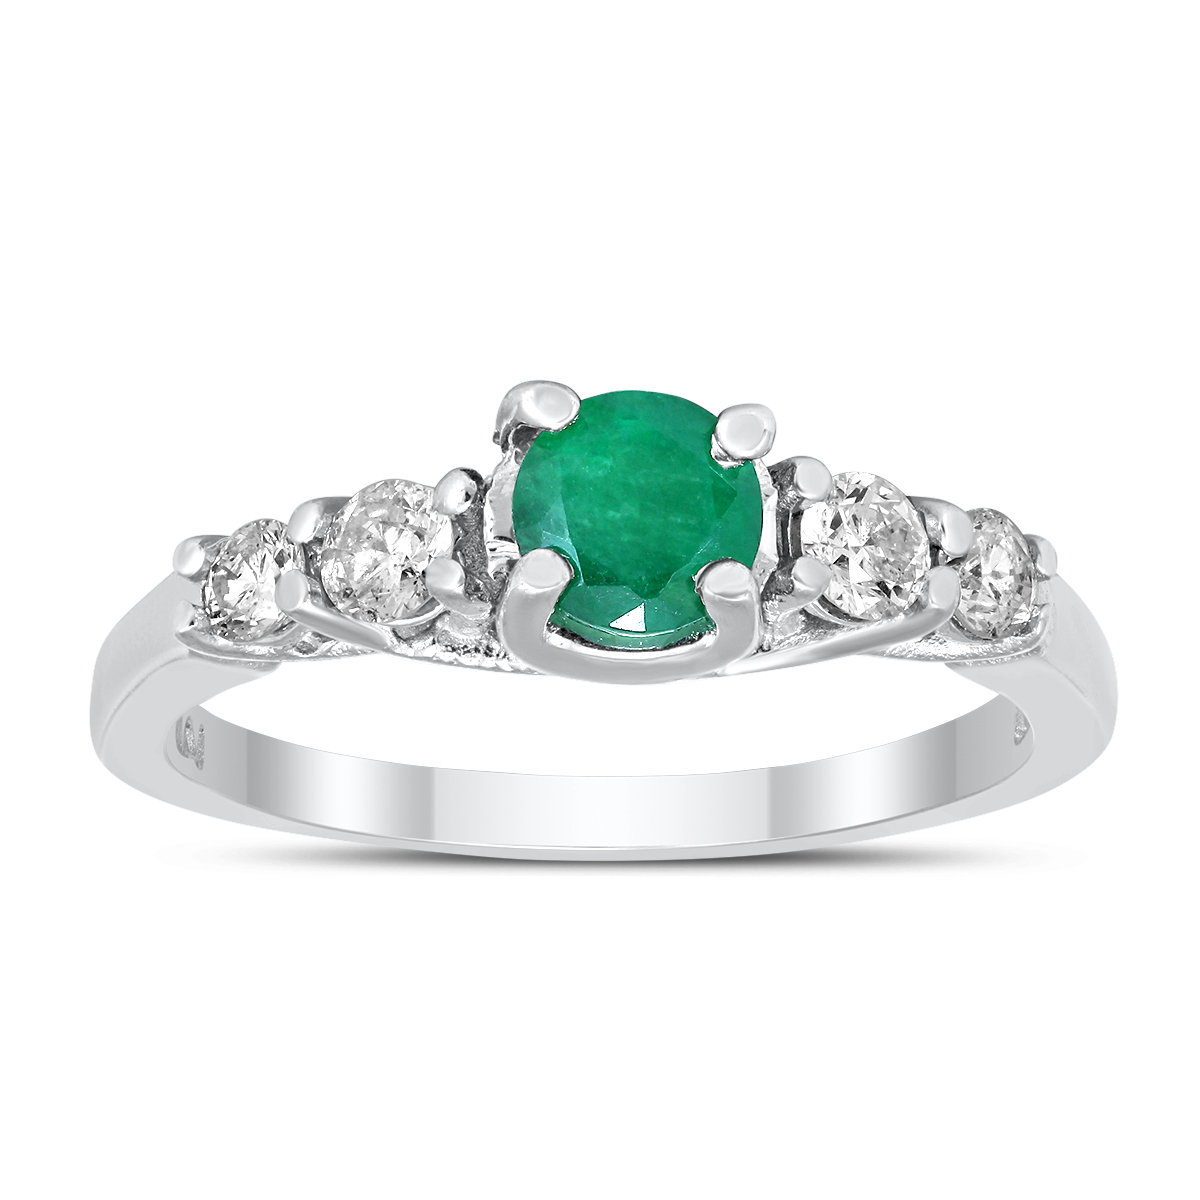 5 Stone Emerald and Diamond Ring in 14K White Gold